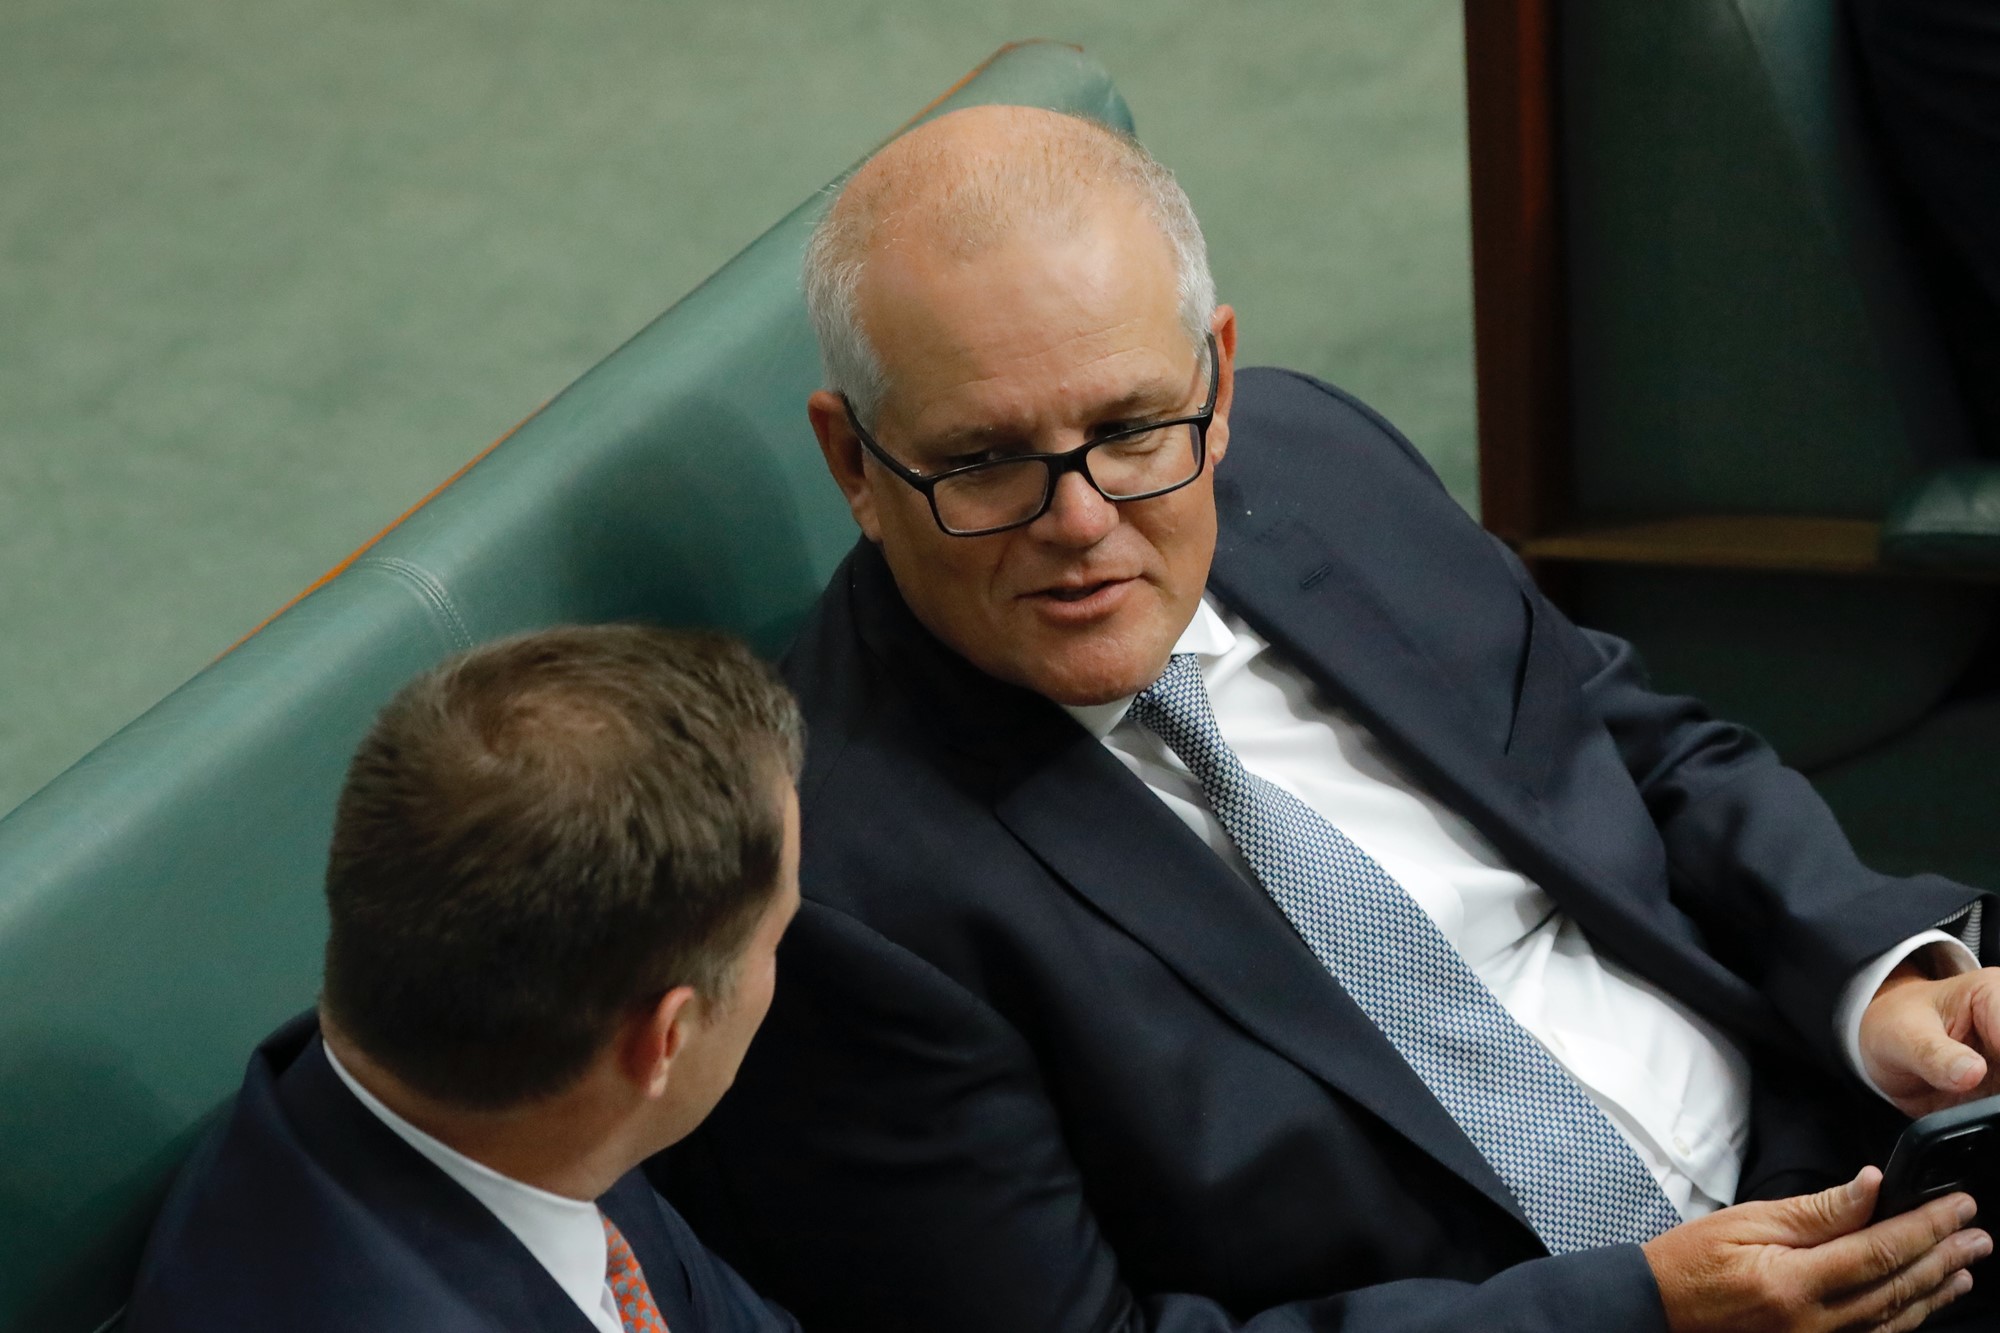 scott morrison holds his phone and leans to talk to the person next to him 